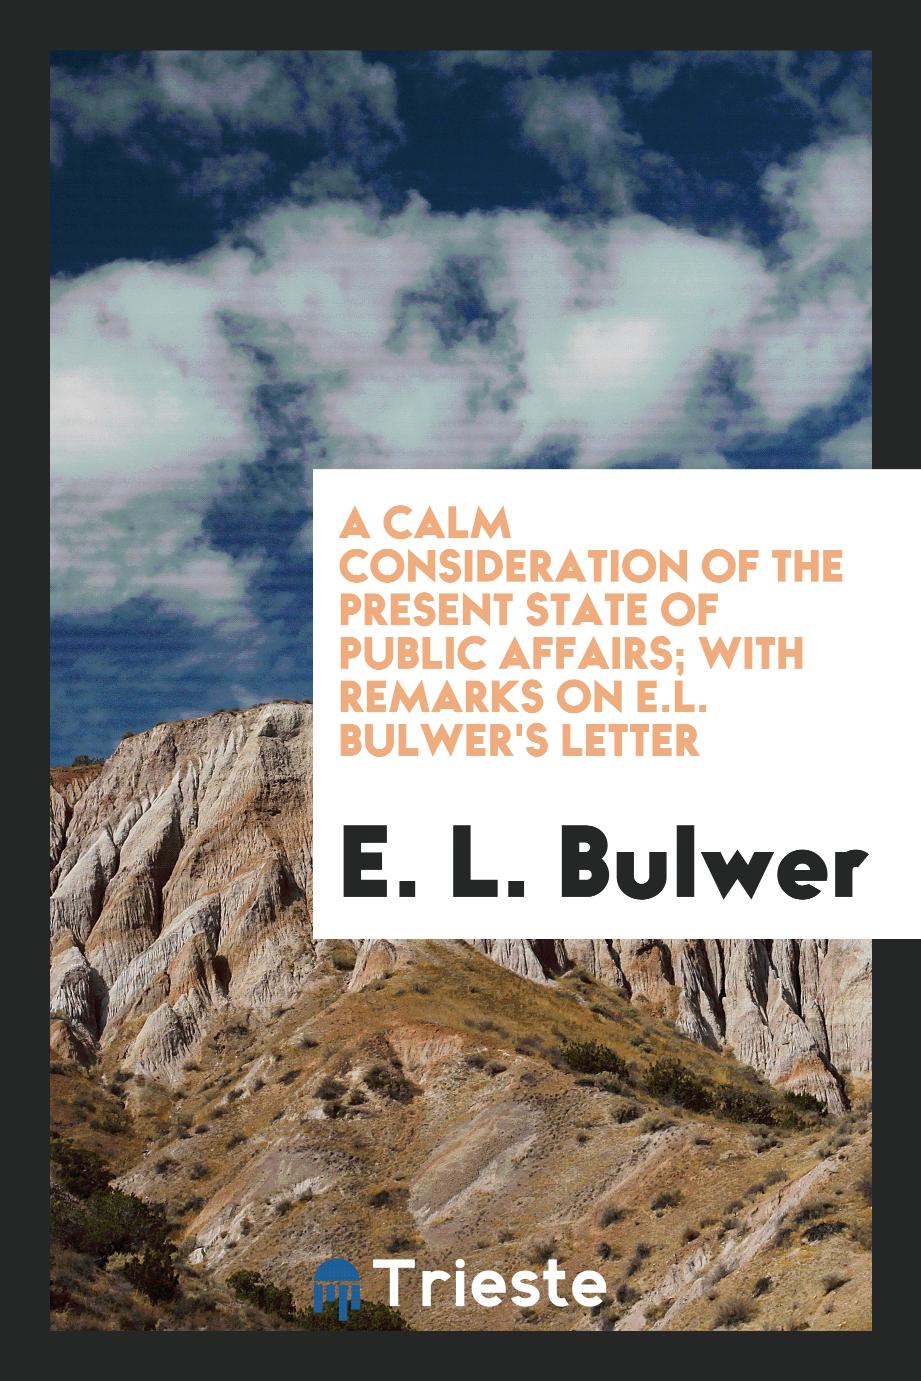 E. L. Bulwer - A calm consideration of the present state of public affairs; with remarks on E.L. Bulwer's letter